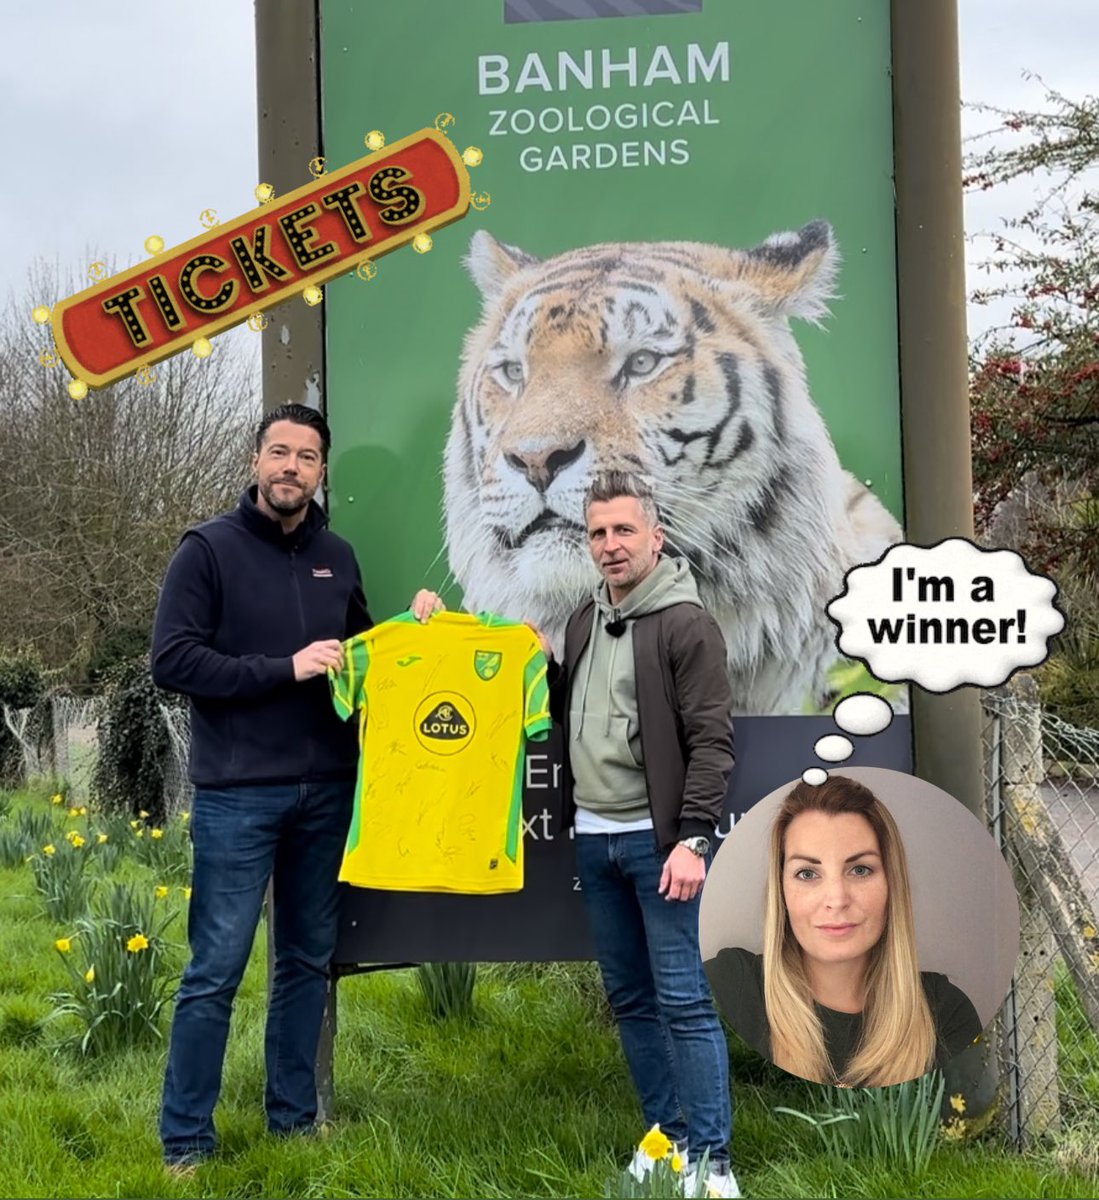 Congratulations to Rachel Davidson (LinkedIn) who has won our latest #giveaway 👏🏼👏🏼👏🏼 A signed @NorwichCityFC shirt and a family pass to Banham Zoo! @pymmandco 🤝 @banhamzoo